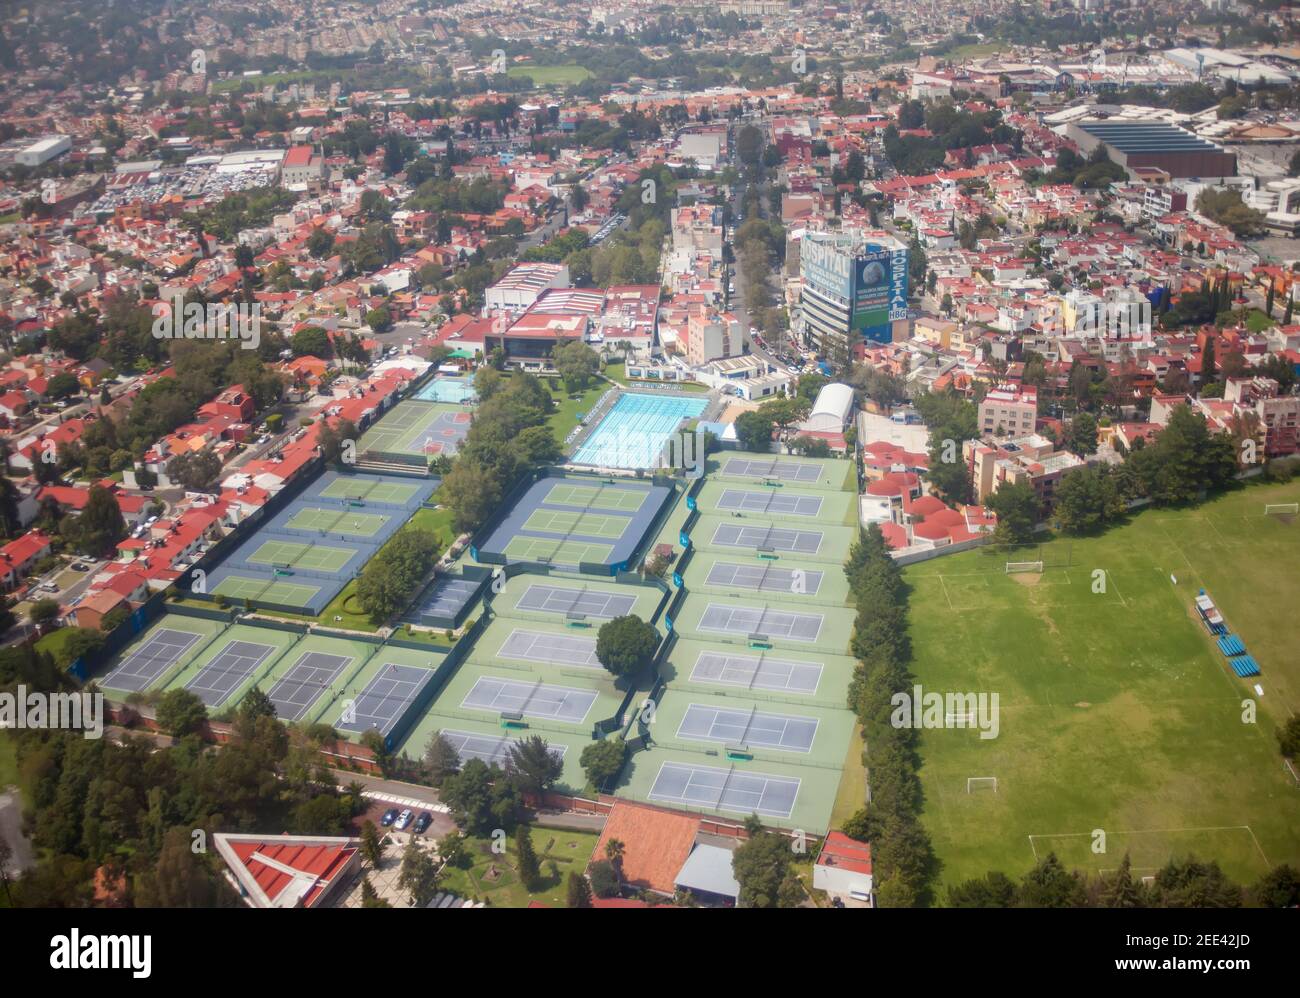 Tennis courts and a swimming pool in Naucalpan de Juarez, Mexico State, Mexico Stock Photo